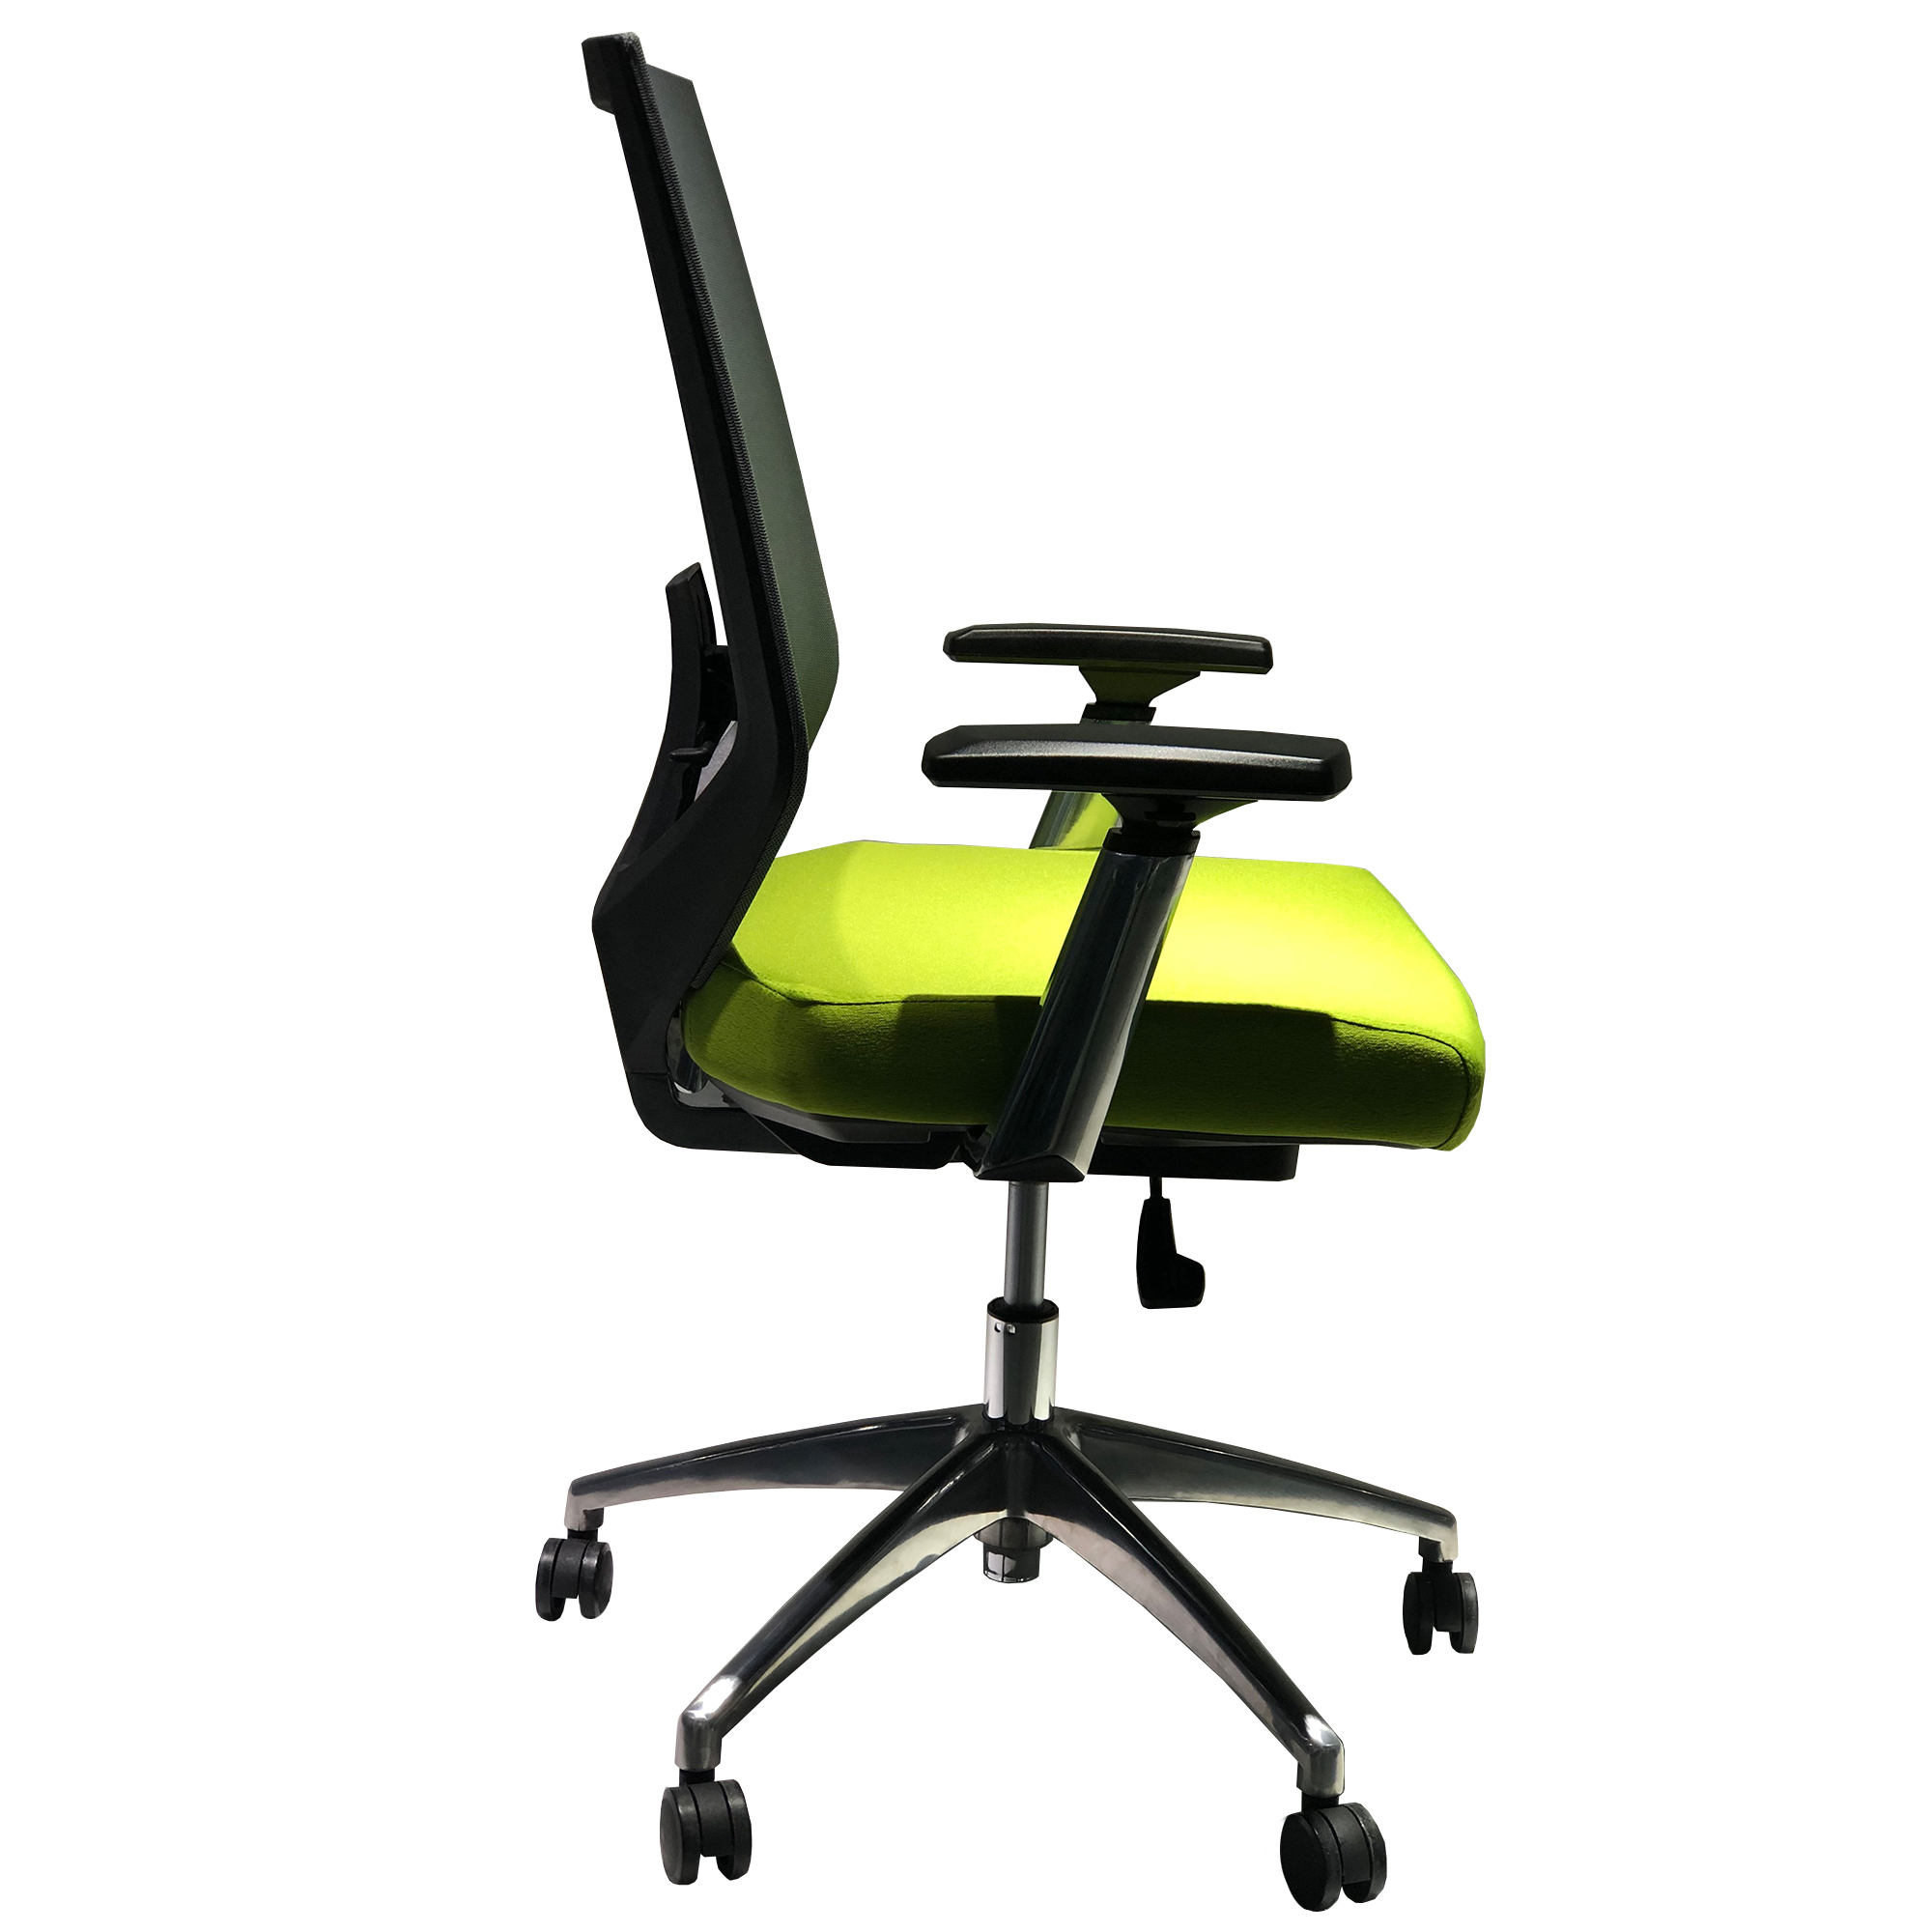 Adjustable Mesh Back Ergonomic Office Swivel Chair With Padded Seat And Casters, Green And Gray- Saltoro Sherpi